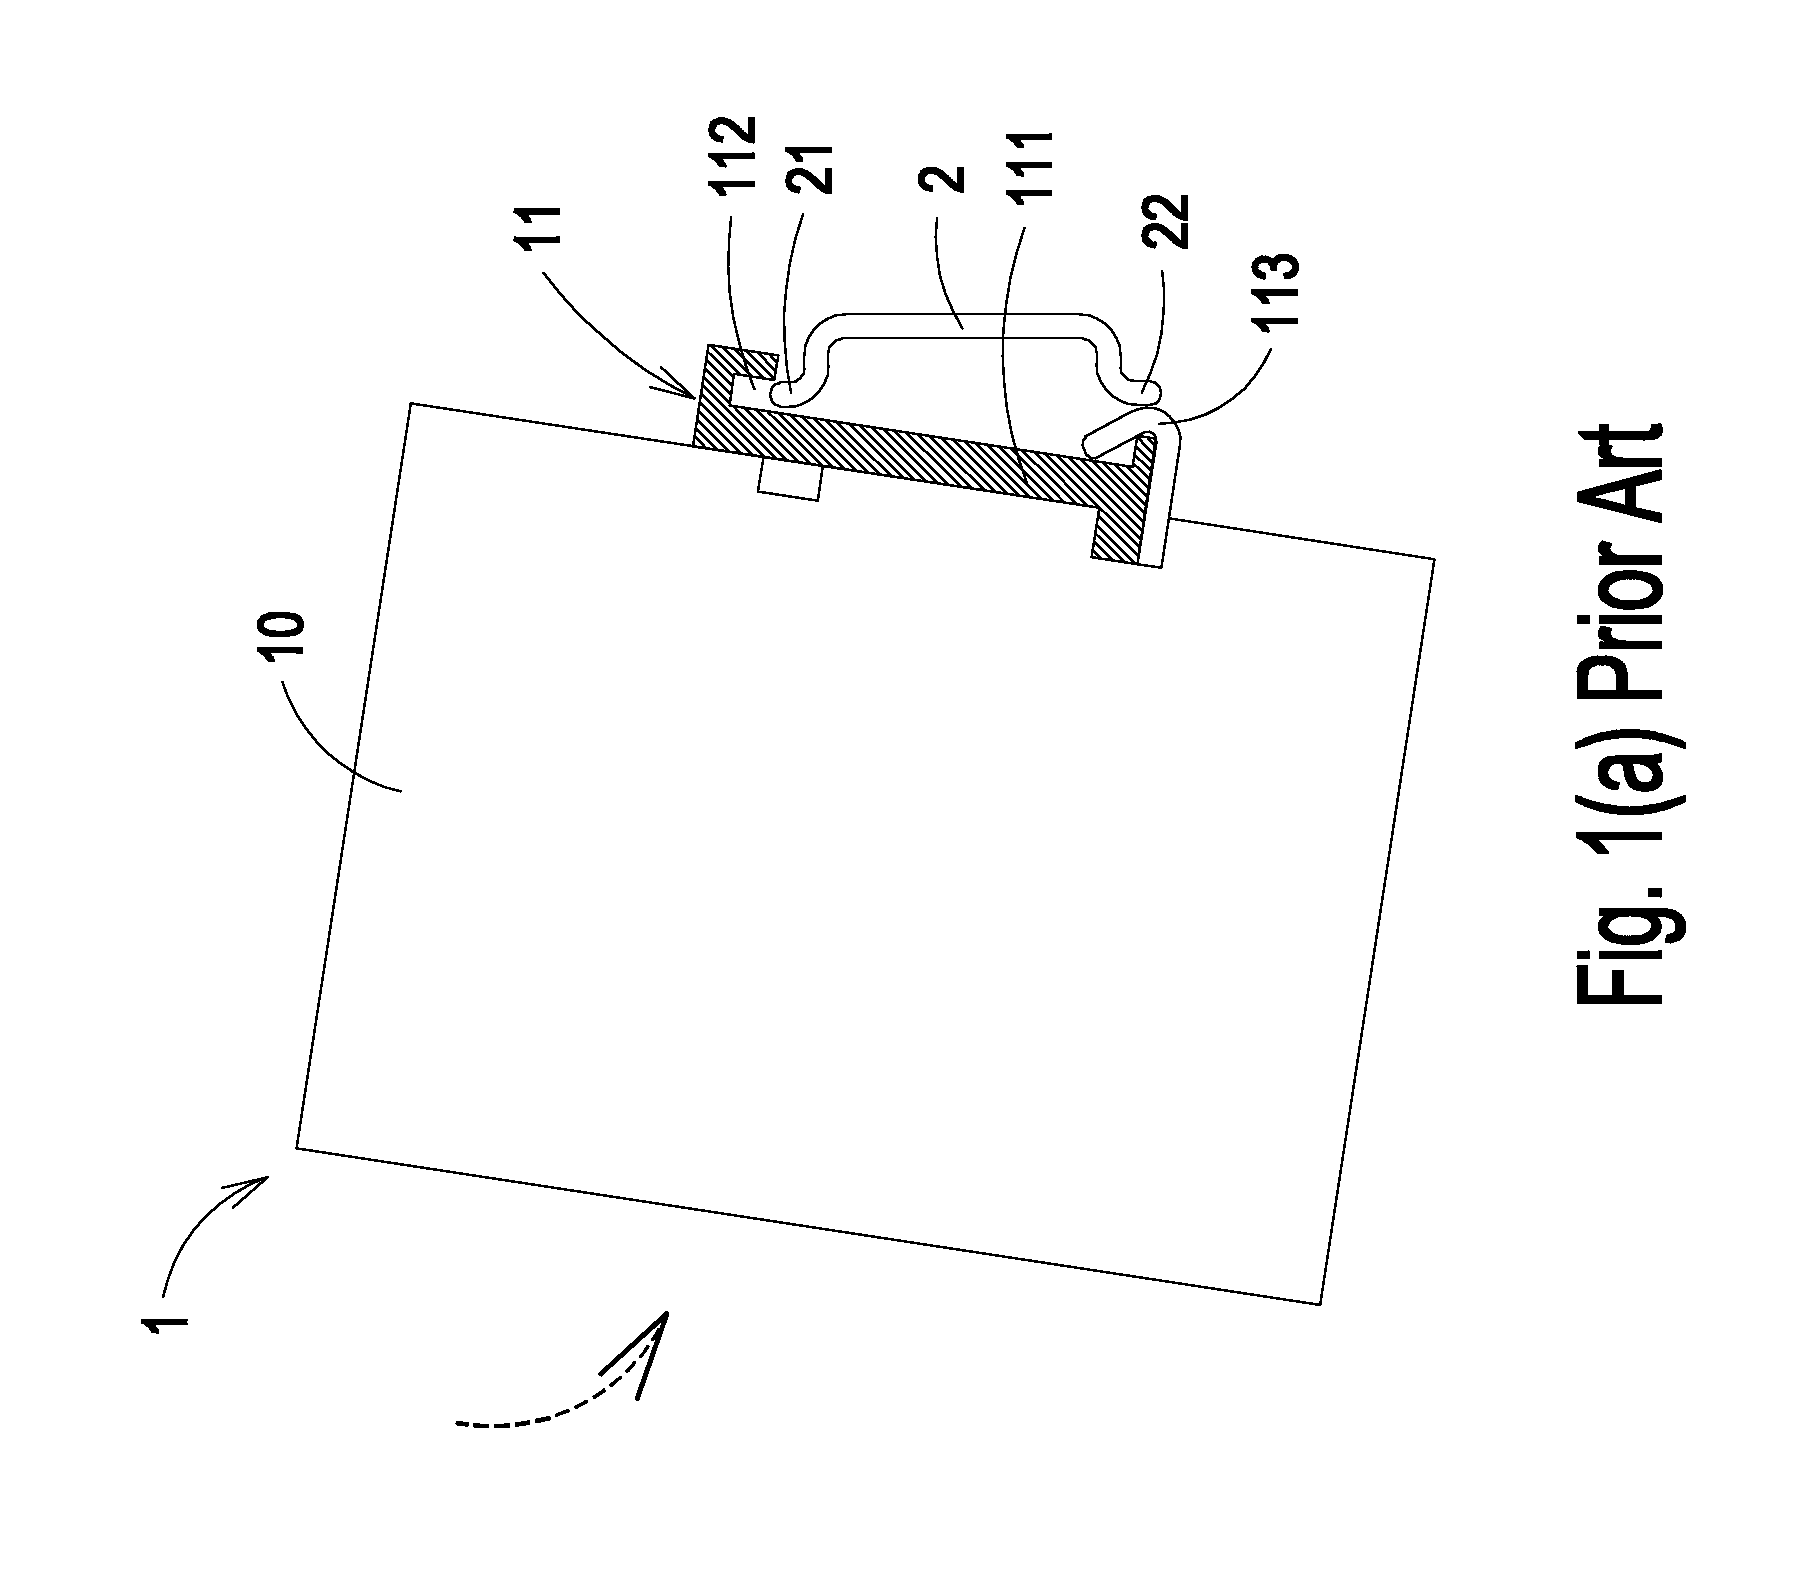 Mechanism of fastening detachable electronic device to DIN rail